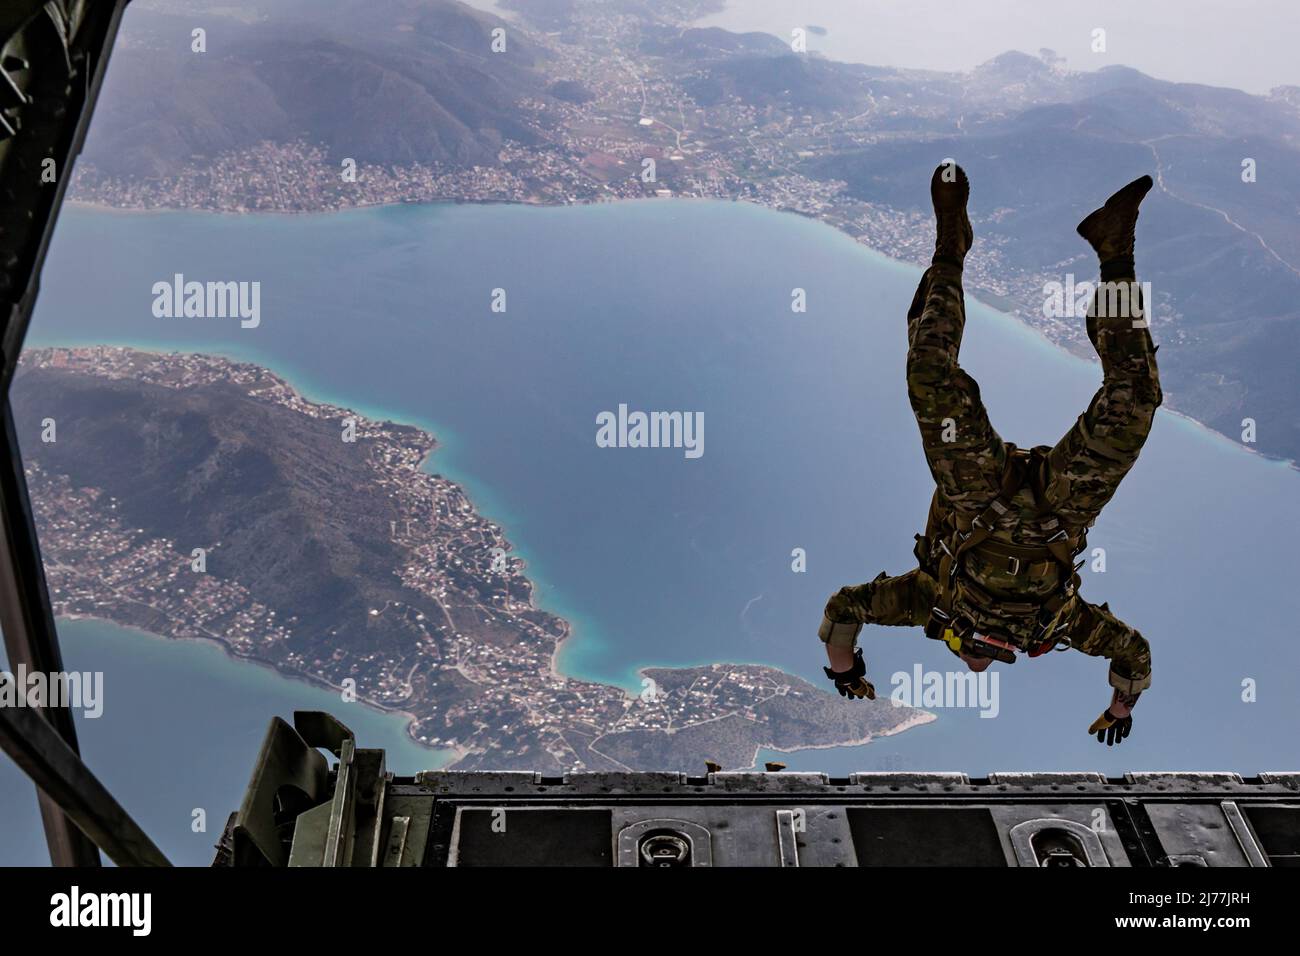 In preparation for Exercise Orion, a U.S. Army Green Beret assigned to 10th Special Forces Group dives from the ramp of a Greek Air Force C-130 aircraft during an airborne operation over a coastal area near Elefsina, Greece, March 30, 2022. Exercise Orion reinforces Greece as a regional Special Operations Forces leader, enhances interoperability across multiple domains, and strengthens relationships with NATO and non-NATO partners. The exercise focuses on highlighting operational capabilities, international collaborations and conventional and hybrid warfare training. (U.S. Army photo by Sgt. H Stock Photo